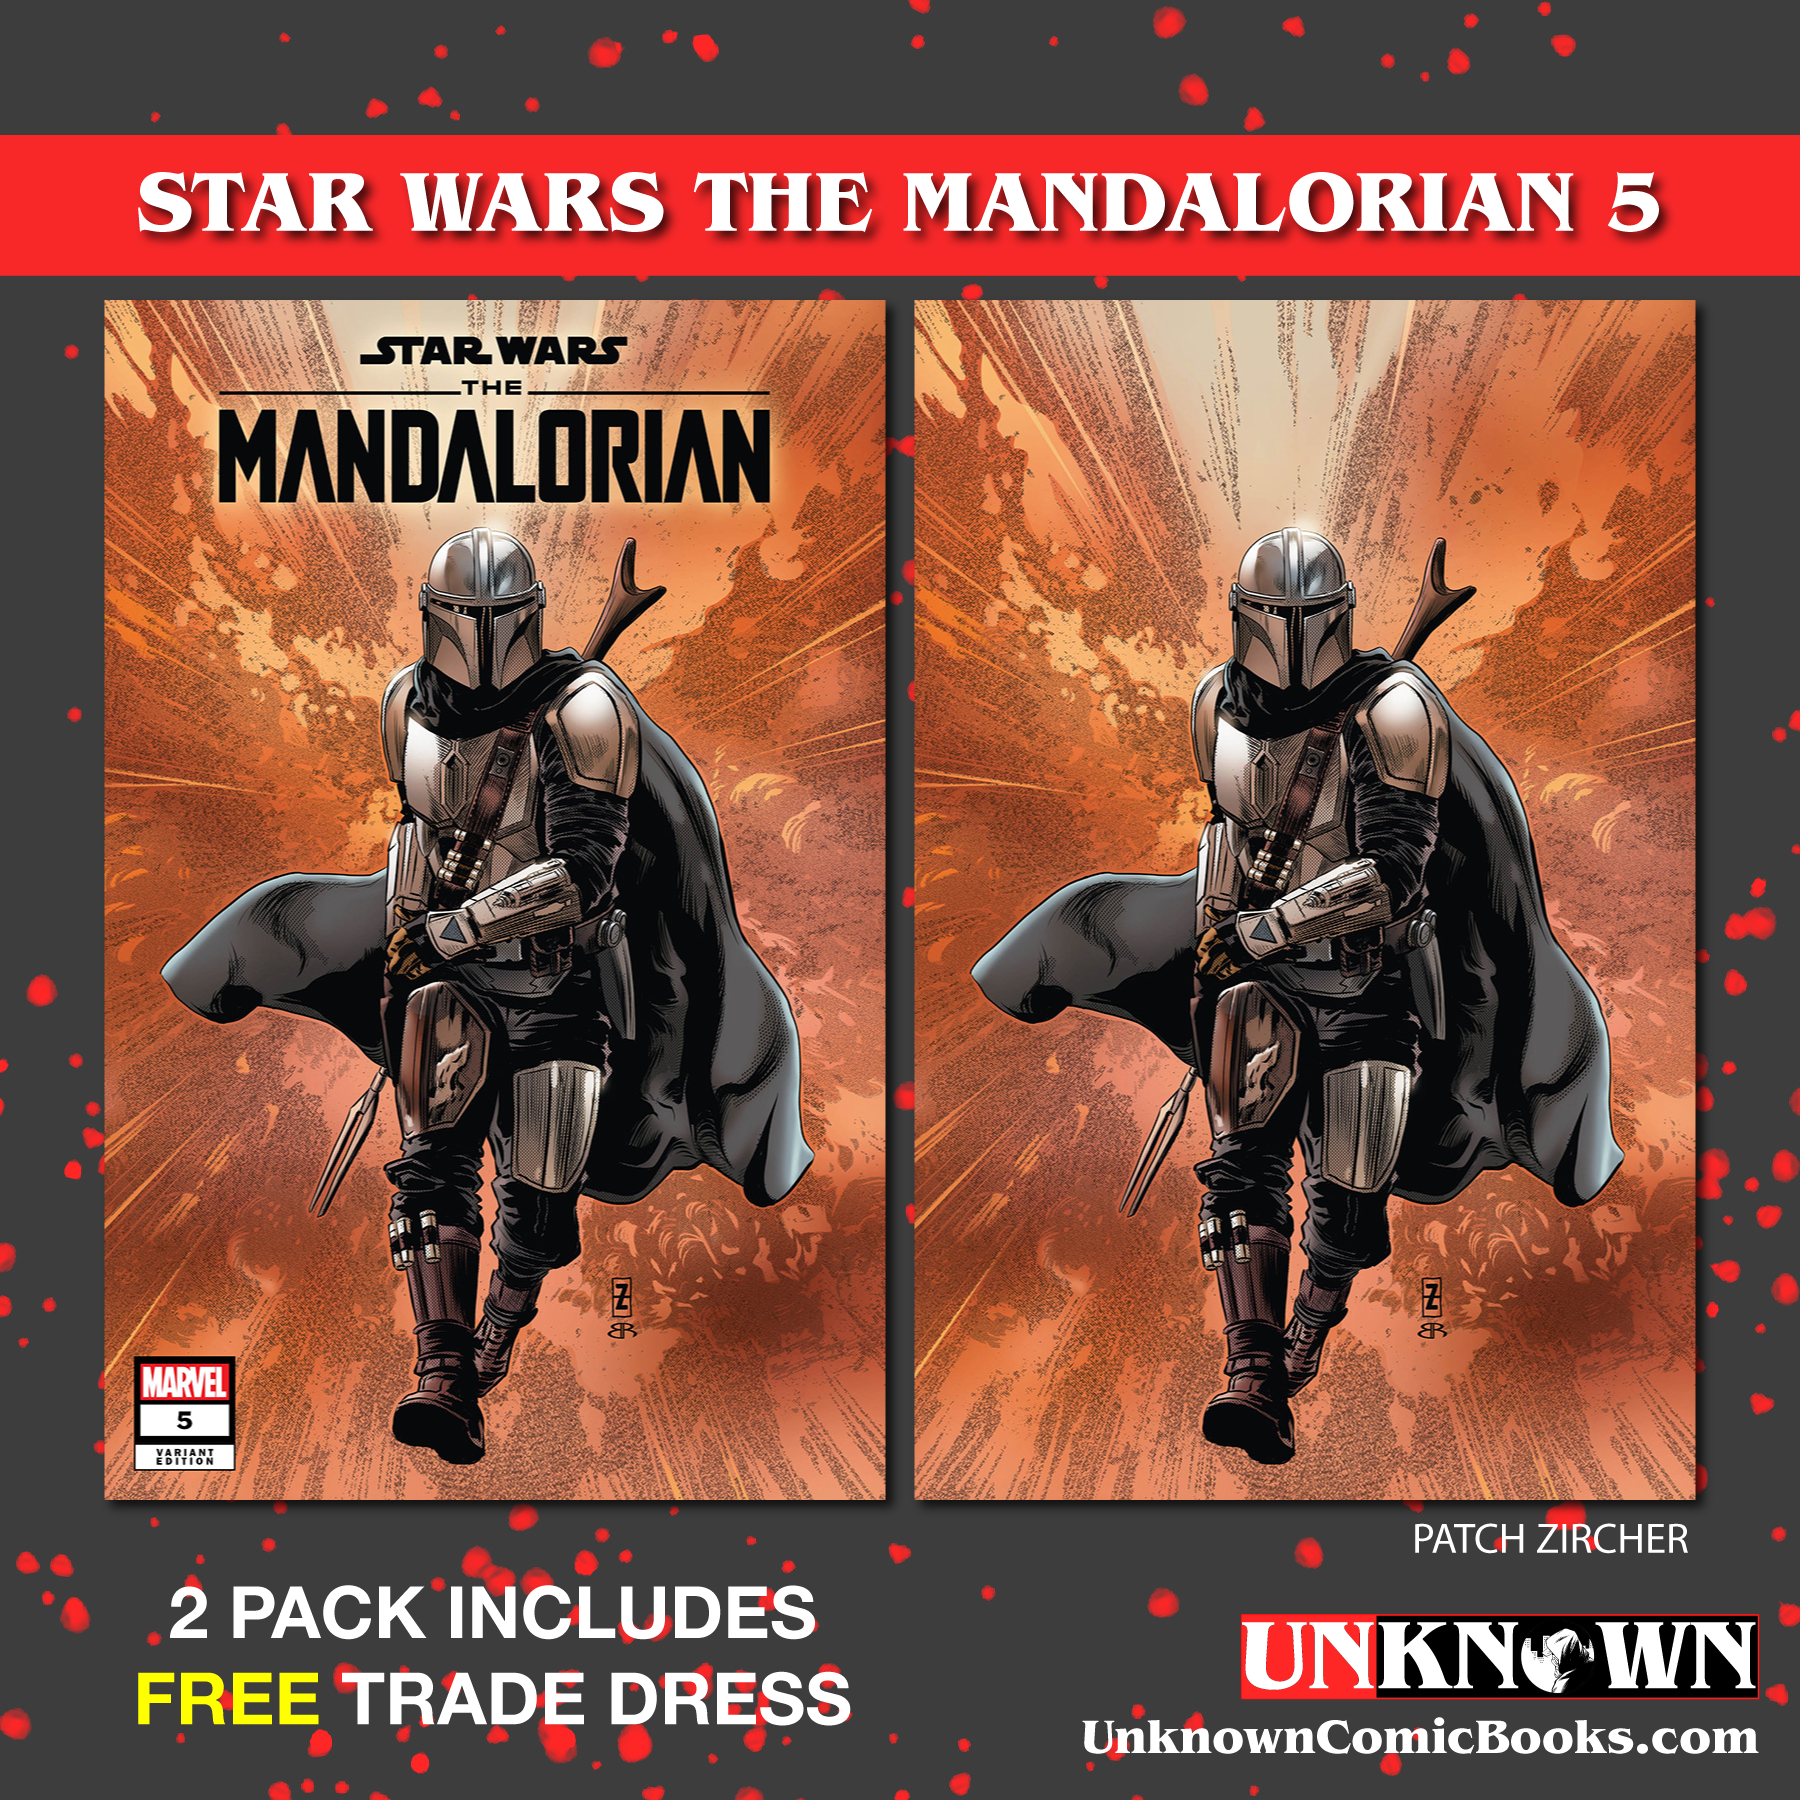 2 PACK **FREE TRADE DRESS** STAR WARS: THE MANDALORIAN #5 UNKNOWN COMICS PATCH ZIRCHER EXCLUSIVE VAR (11/02/2022)